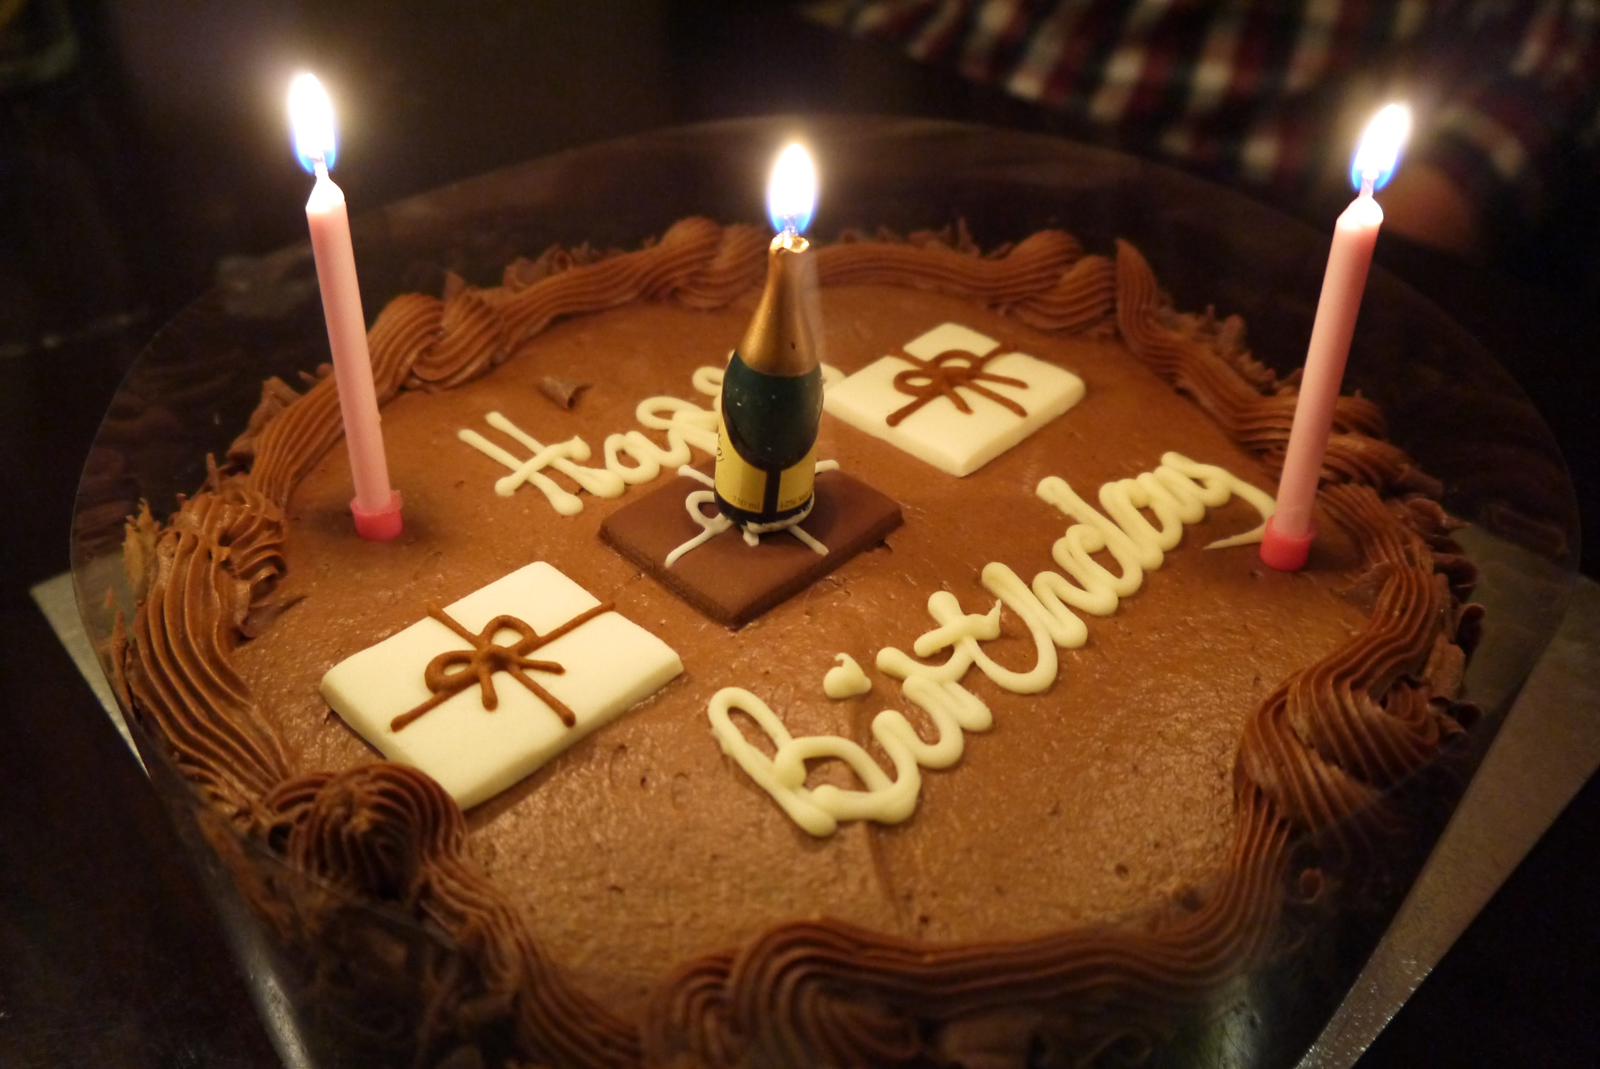 pic of birthday cake with name